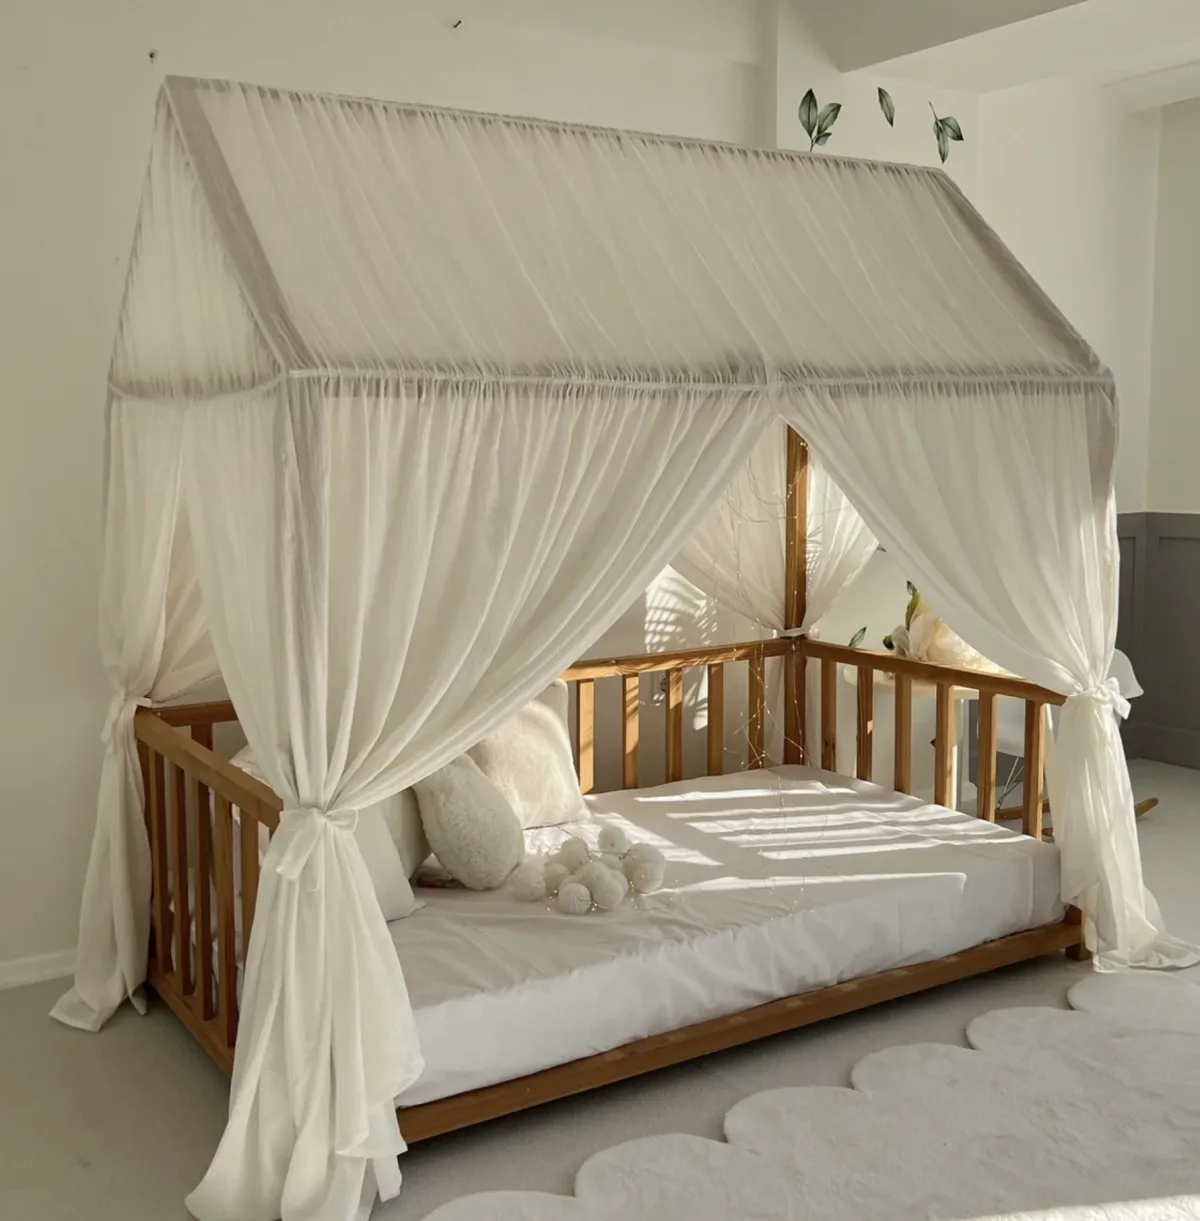 Customized Montessori Bed Canopy, Curtains